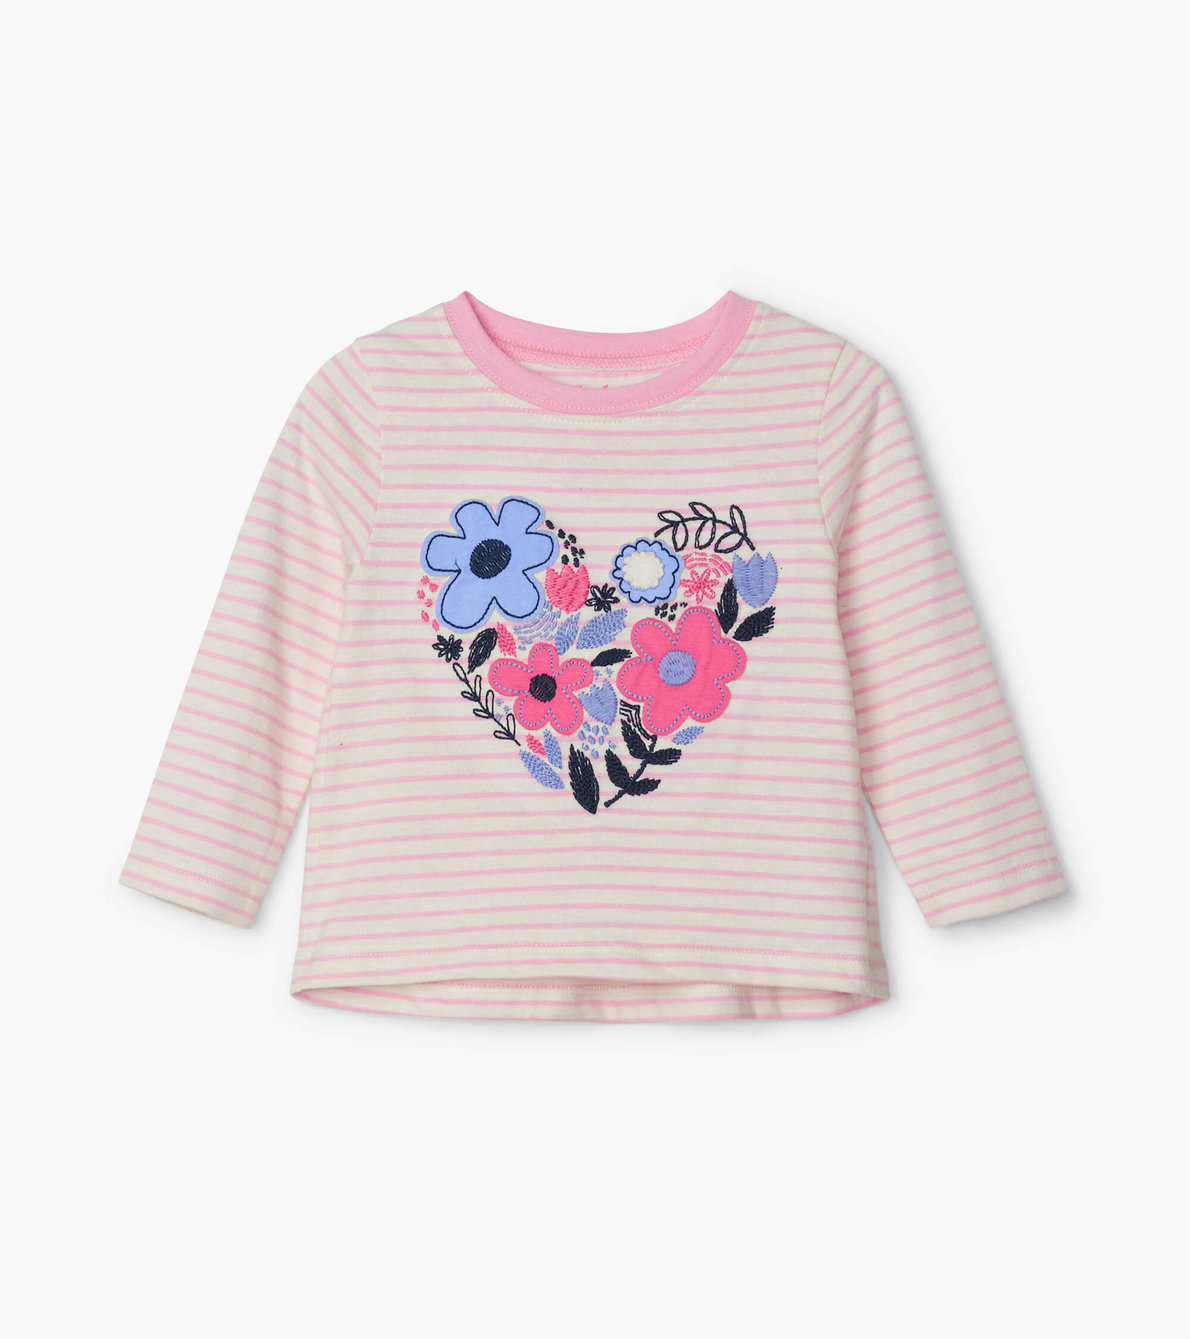 View larger image of Cut-out Floral Long Sleeve Baby Tee